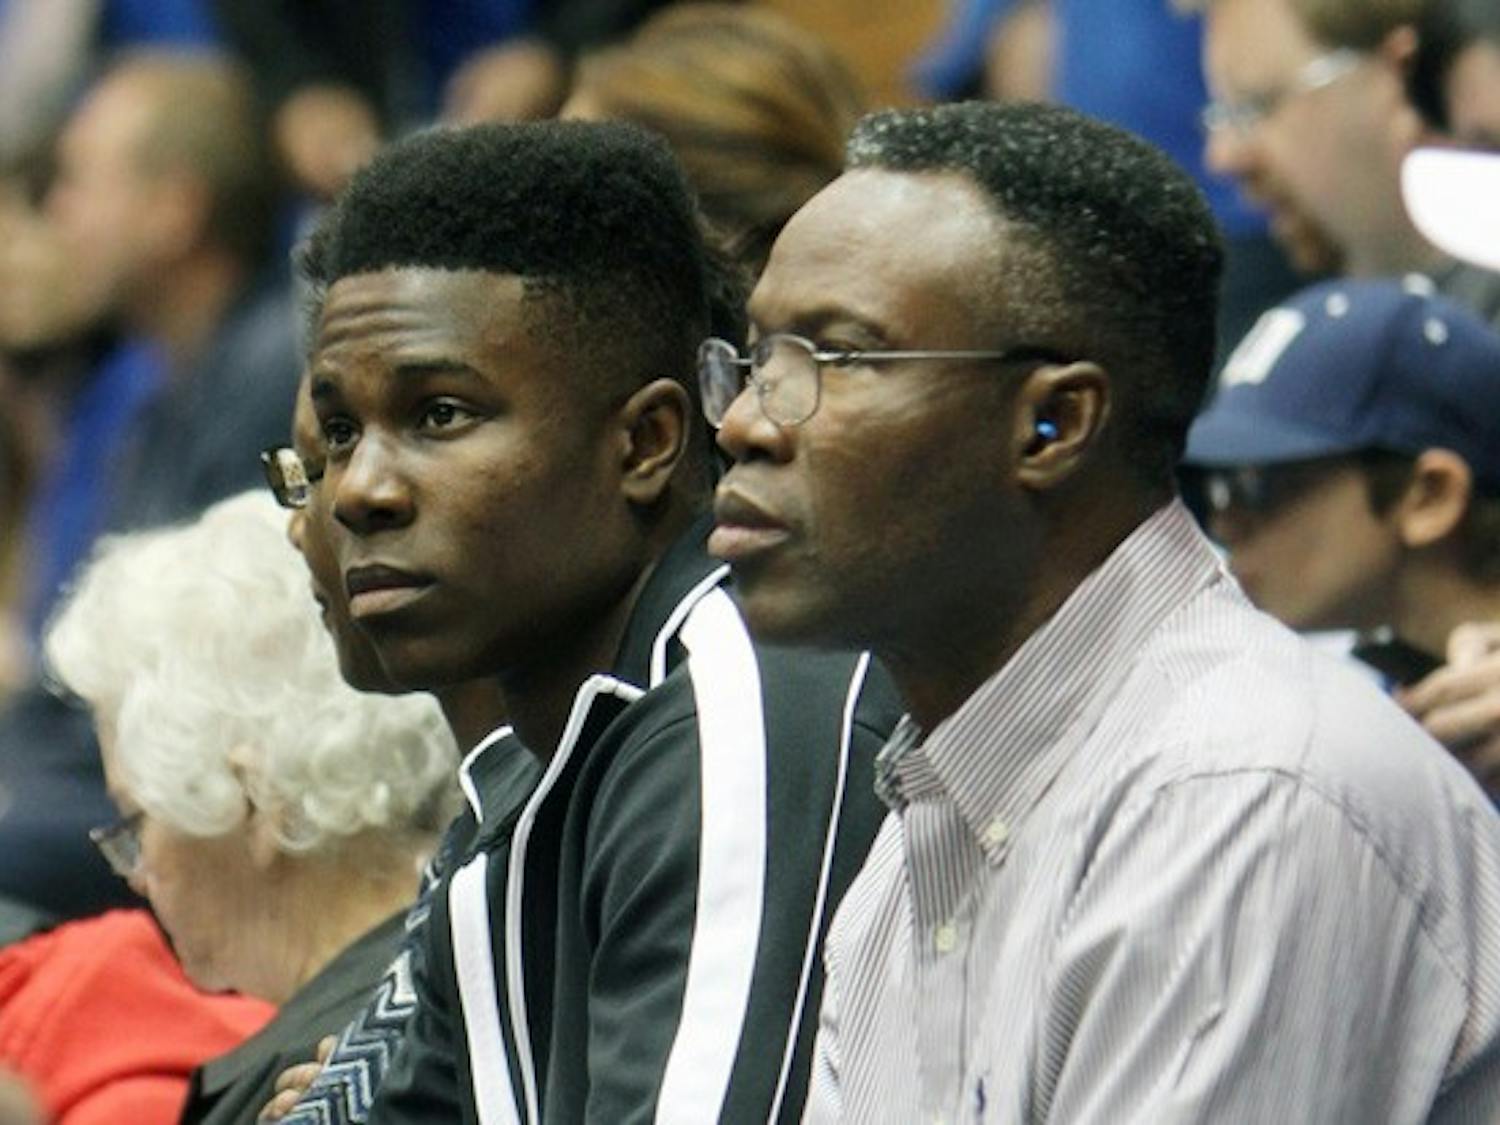 Duke basketball recruit Semi Ojeleye visited earlier in the season but the NCAA still has work to do to reform its methods, Cusack writes.